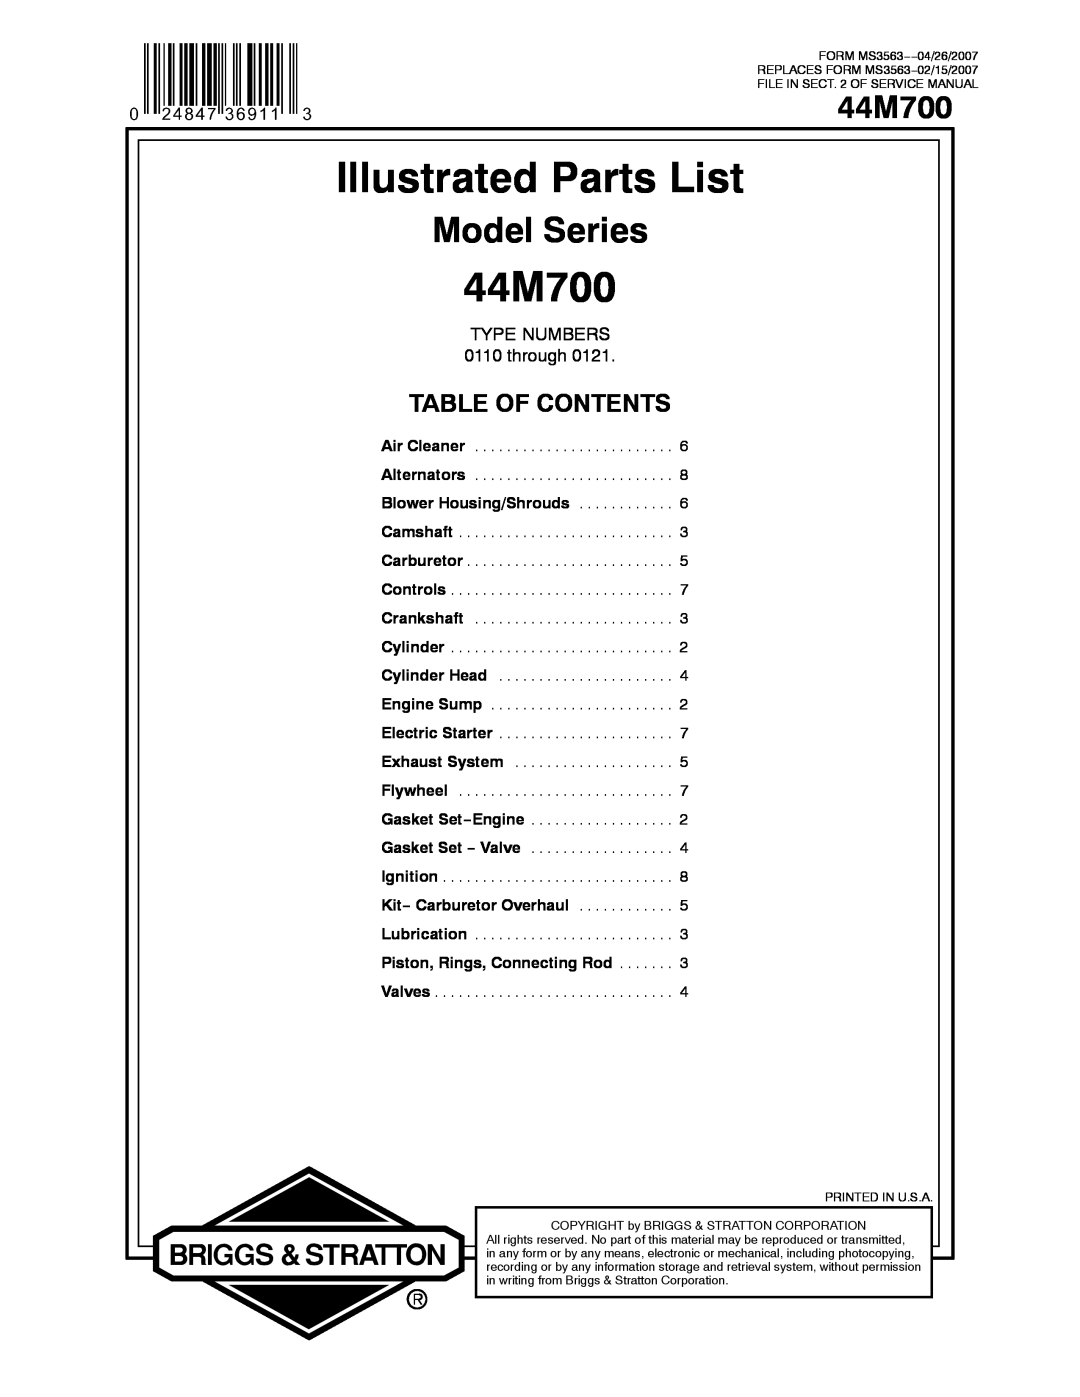 Briggs & Stratton 44M700 service manual Illustrated Parts List, Model Series, Table Of Contents, TYPE NUMBERS 0110 through 